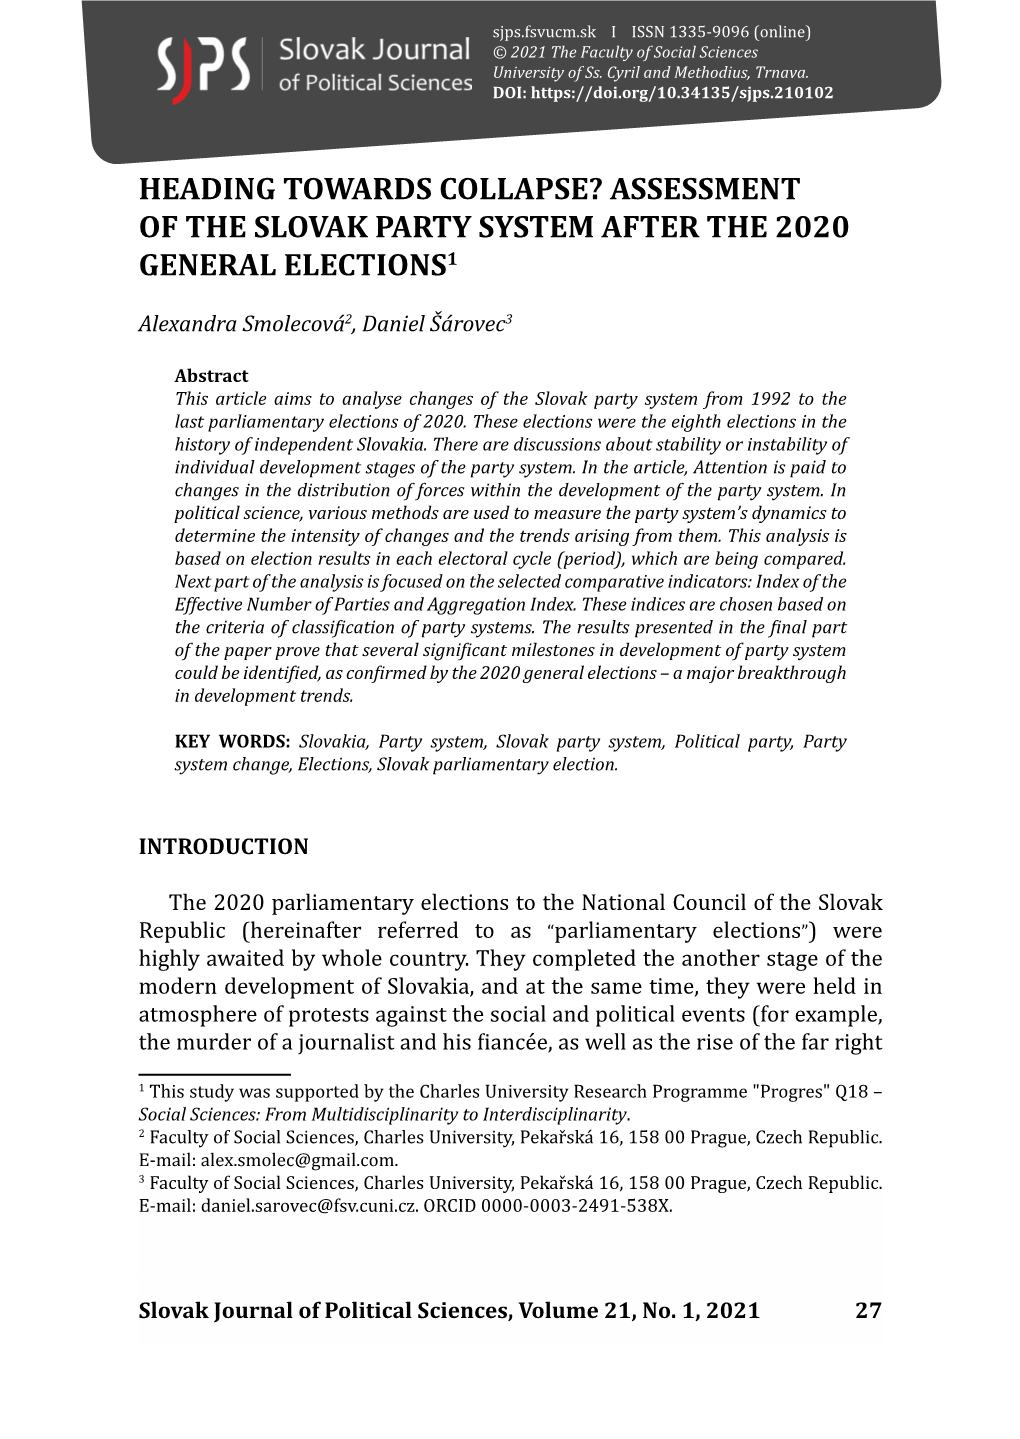 Heading Towards Collapse? Assessment of the Slovak Party System After the 2020 General Elections1